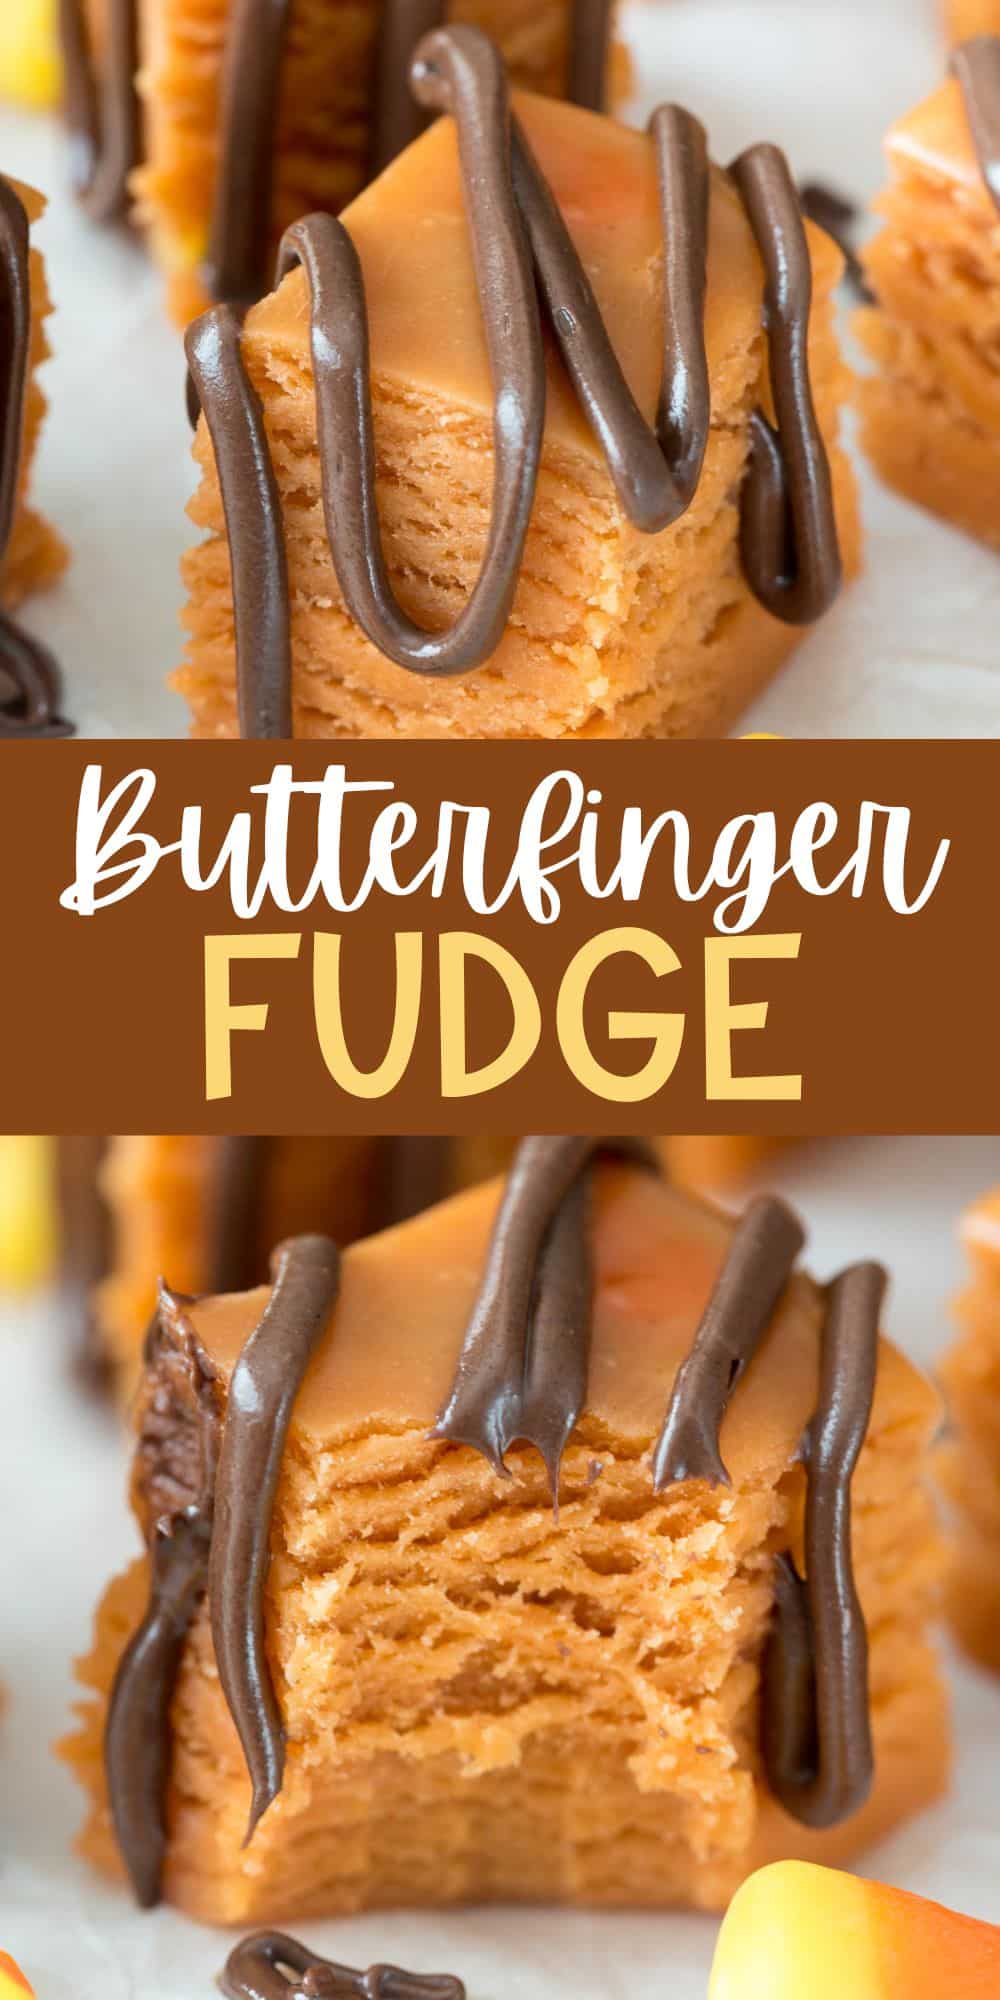 two photos of orange butterfinger fudge with chocolate sauce dripped over the top and words on the image.